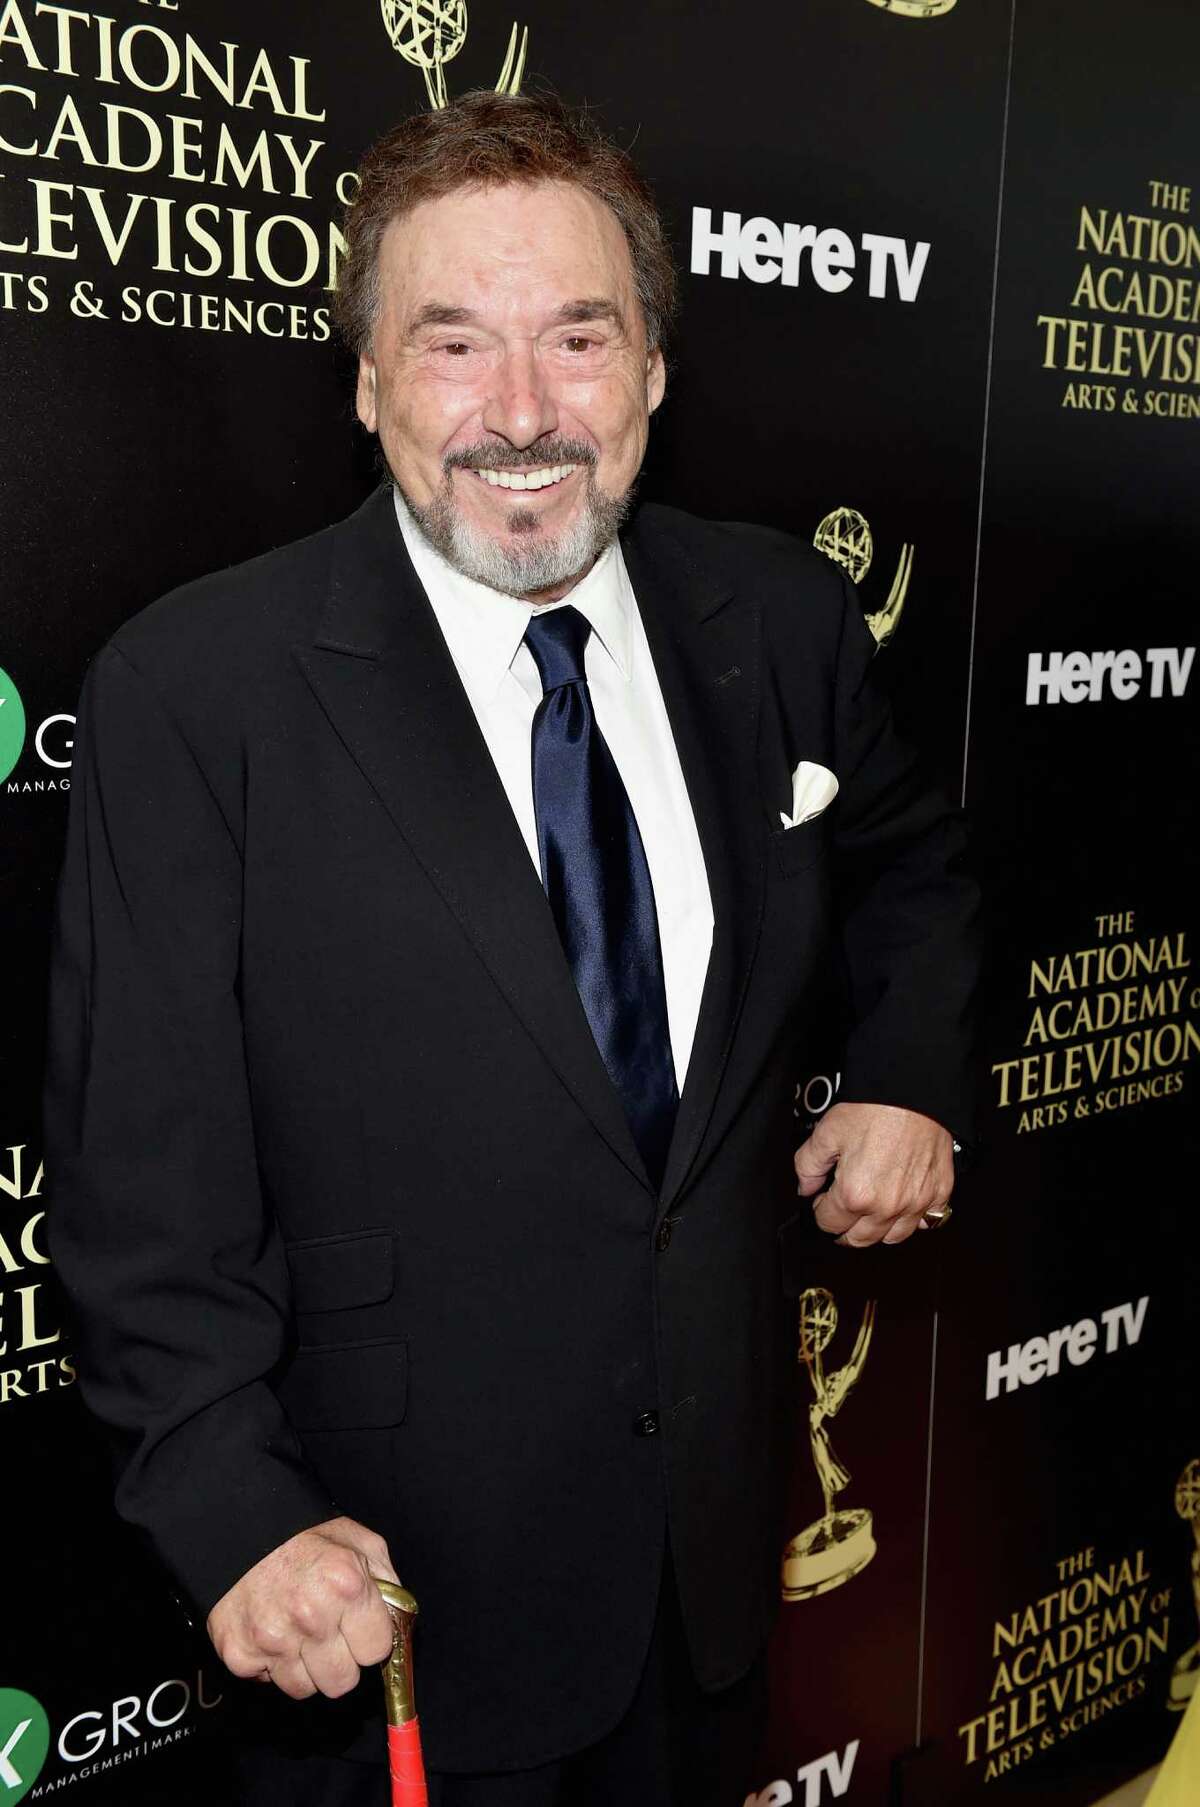 ﻿Actor Joseph Mascolo, known for his work as a bad guy on "Days of Our Lives," battled with Alzheimer's disease. He was 87 years old. ﻿